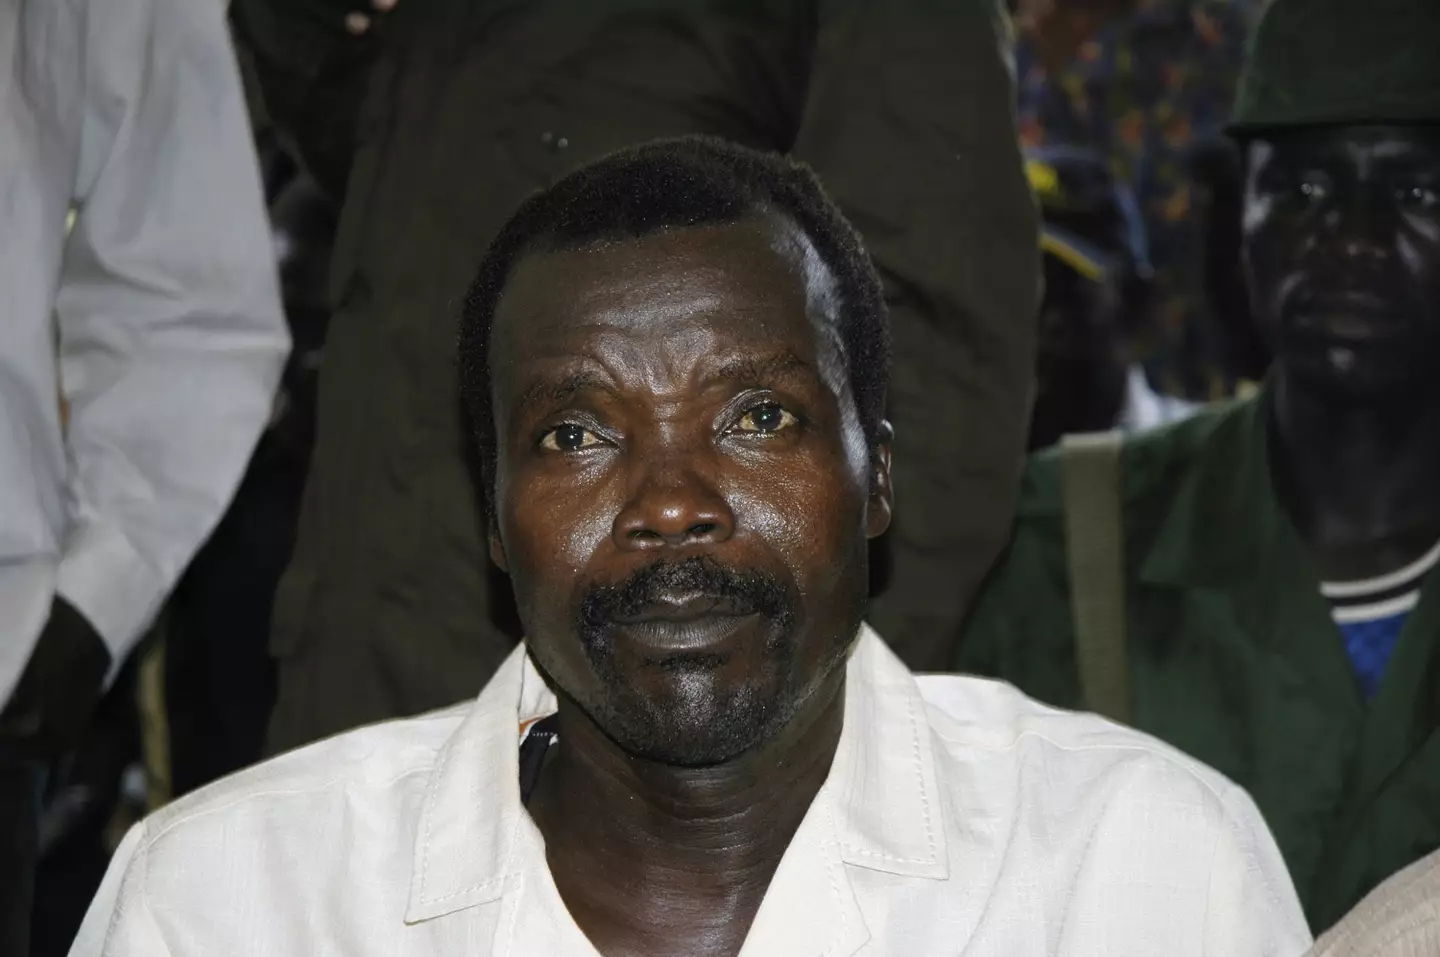 The warlord's group have been designated terrorists, and Joseph Kony is wanted for crimes against humanity. (STUART PRICE/AFP via Getty Images)